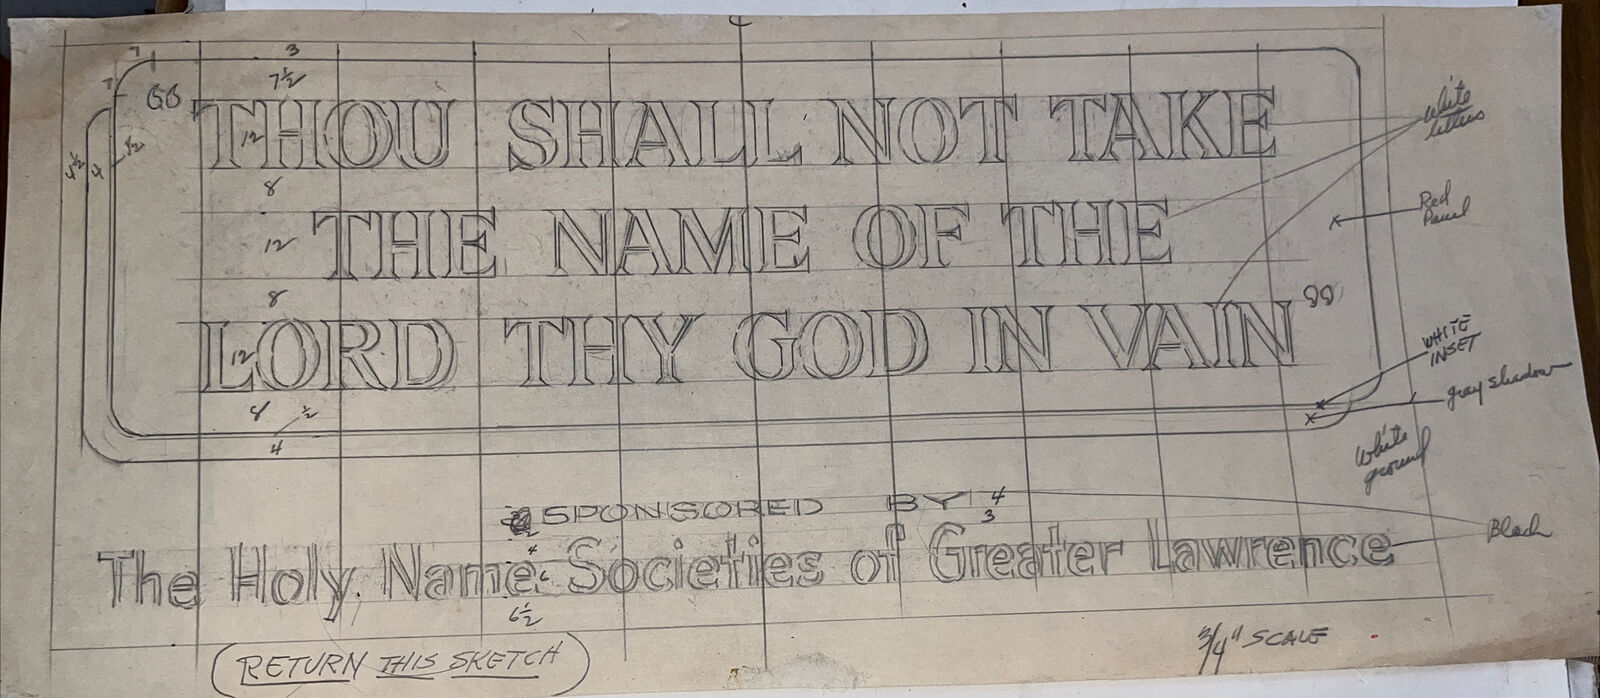 Vintage Billboard Ad Sketch: The Holy Name Societies of Greater Lawrence MA Mass